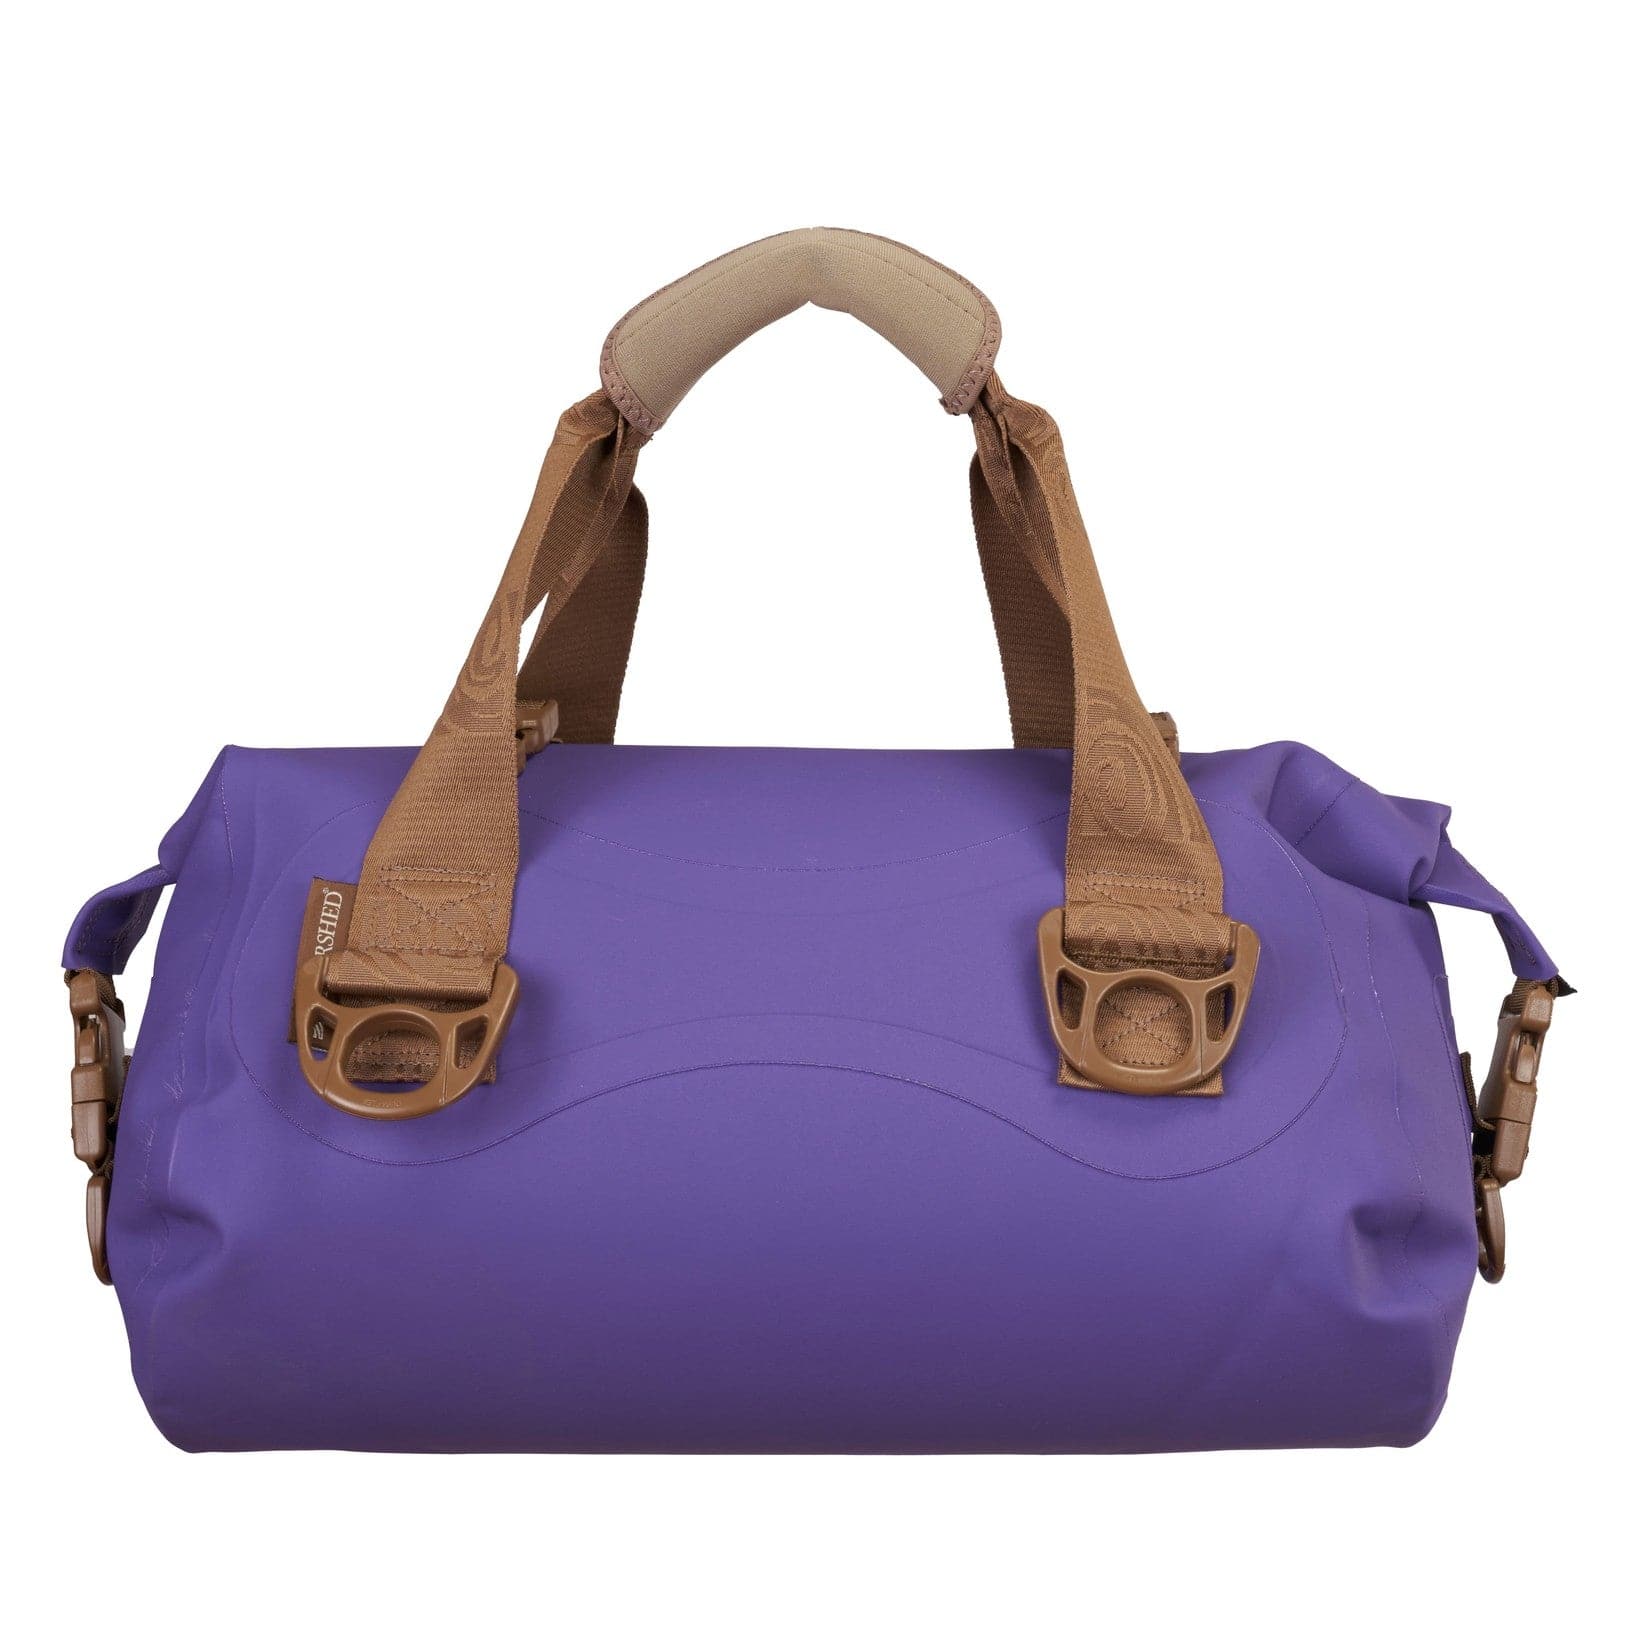 a purple duffel bag with a brown handle.